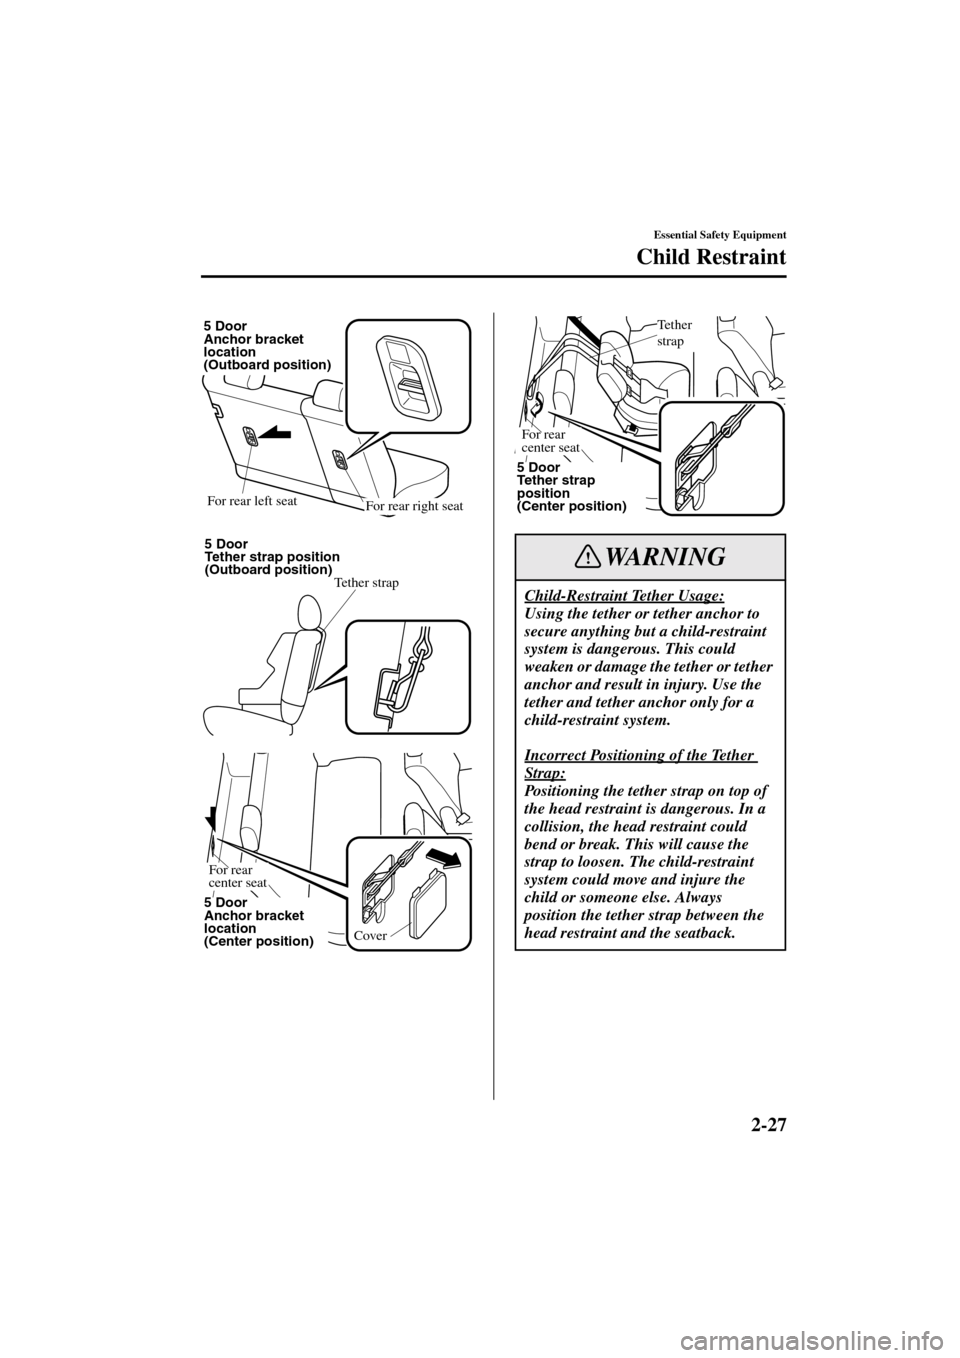 MAZDA MODEL 3 HATCHBACK 2004   (in English) Owners Guide 2-27
Essential Safety Equipment
Child Restraint
Form No. 8S18-EA-03I
For rear left seatFor rear right seat
5 Door
Anchor bracket 
location
(Outboard position)
5 Door
Tether strap position
(Outboard po